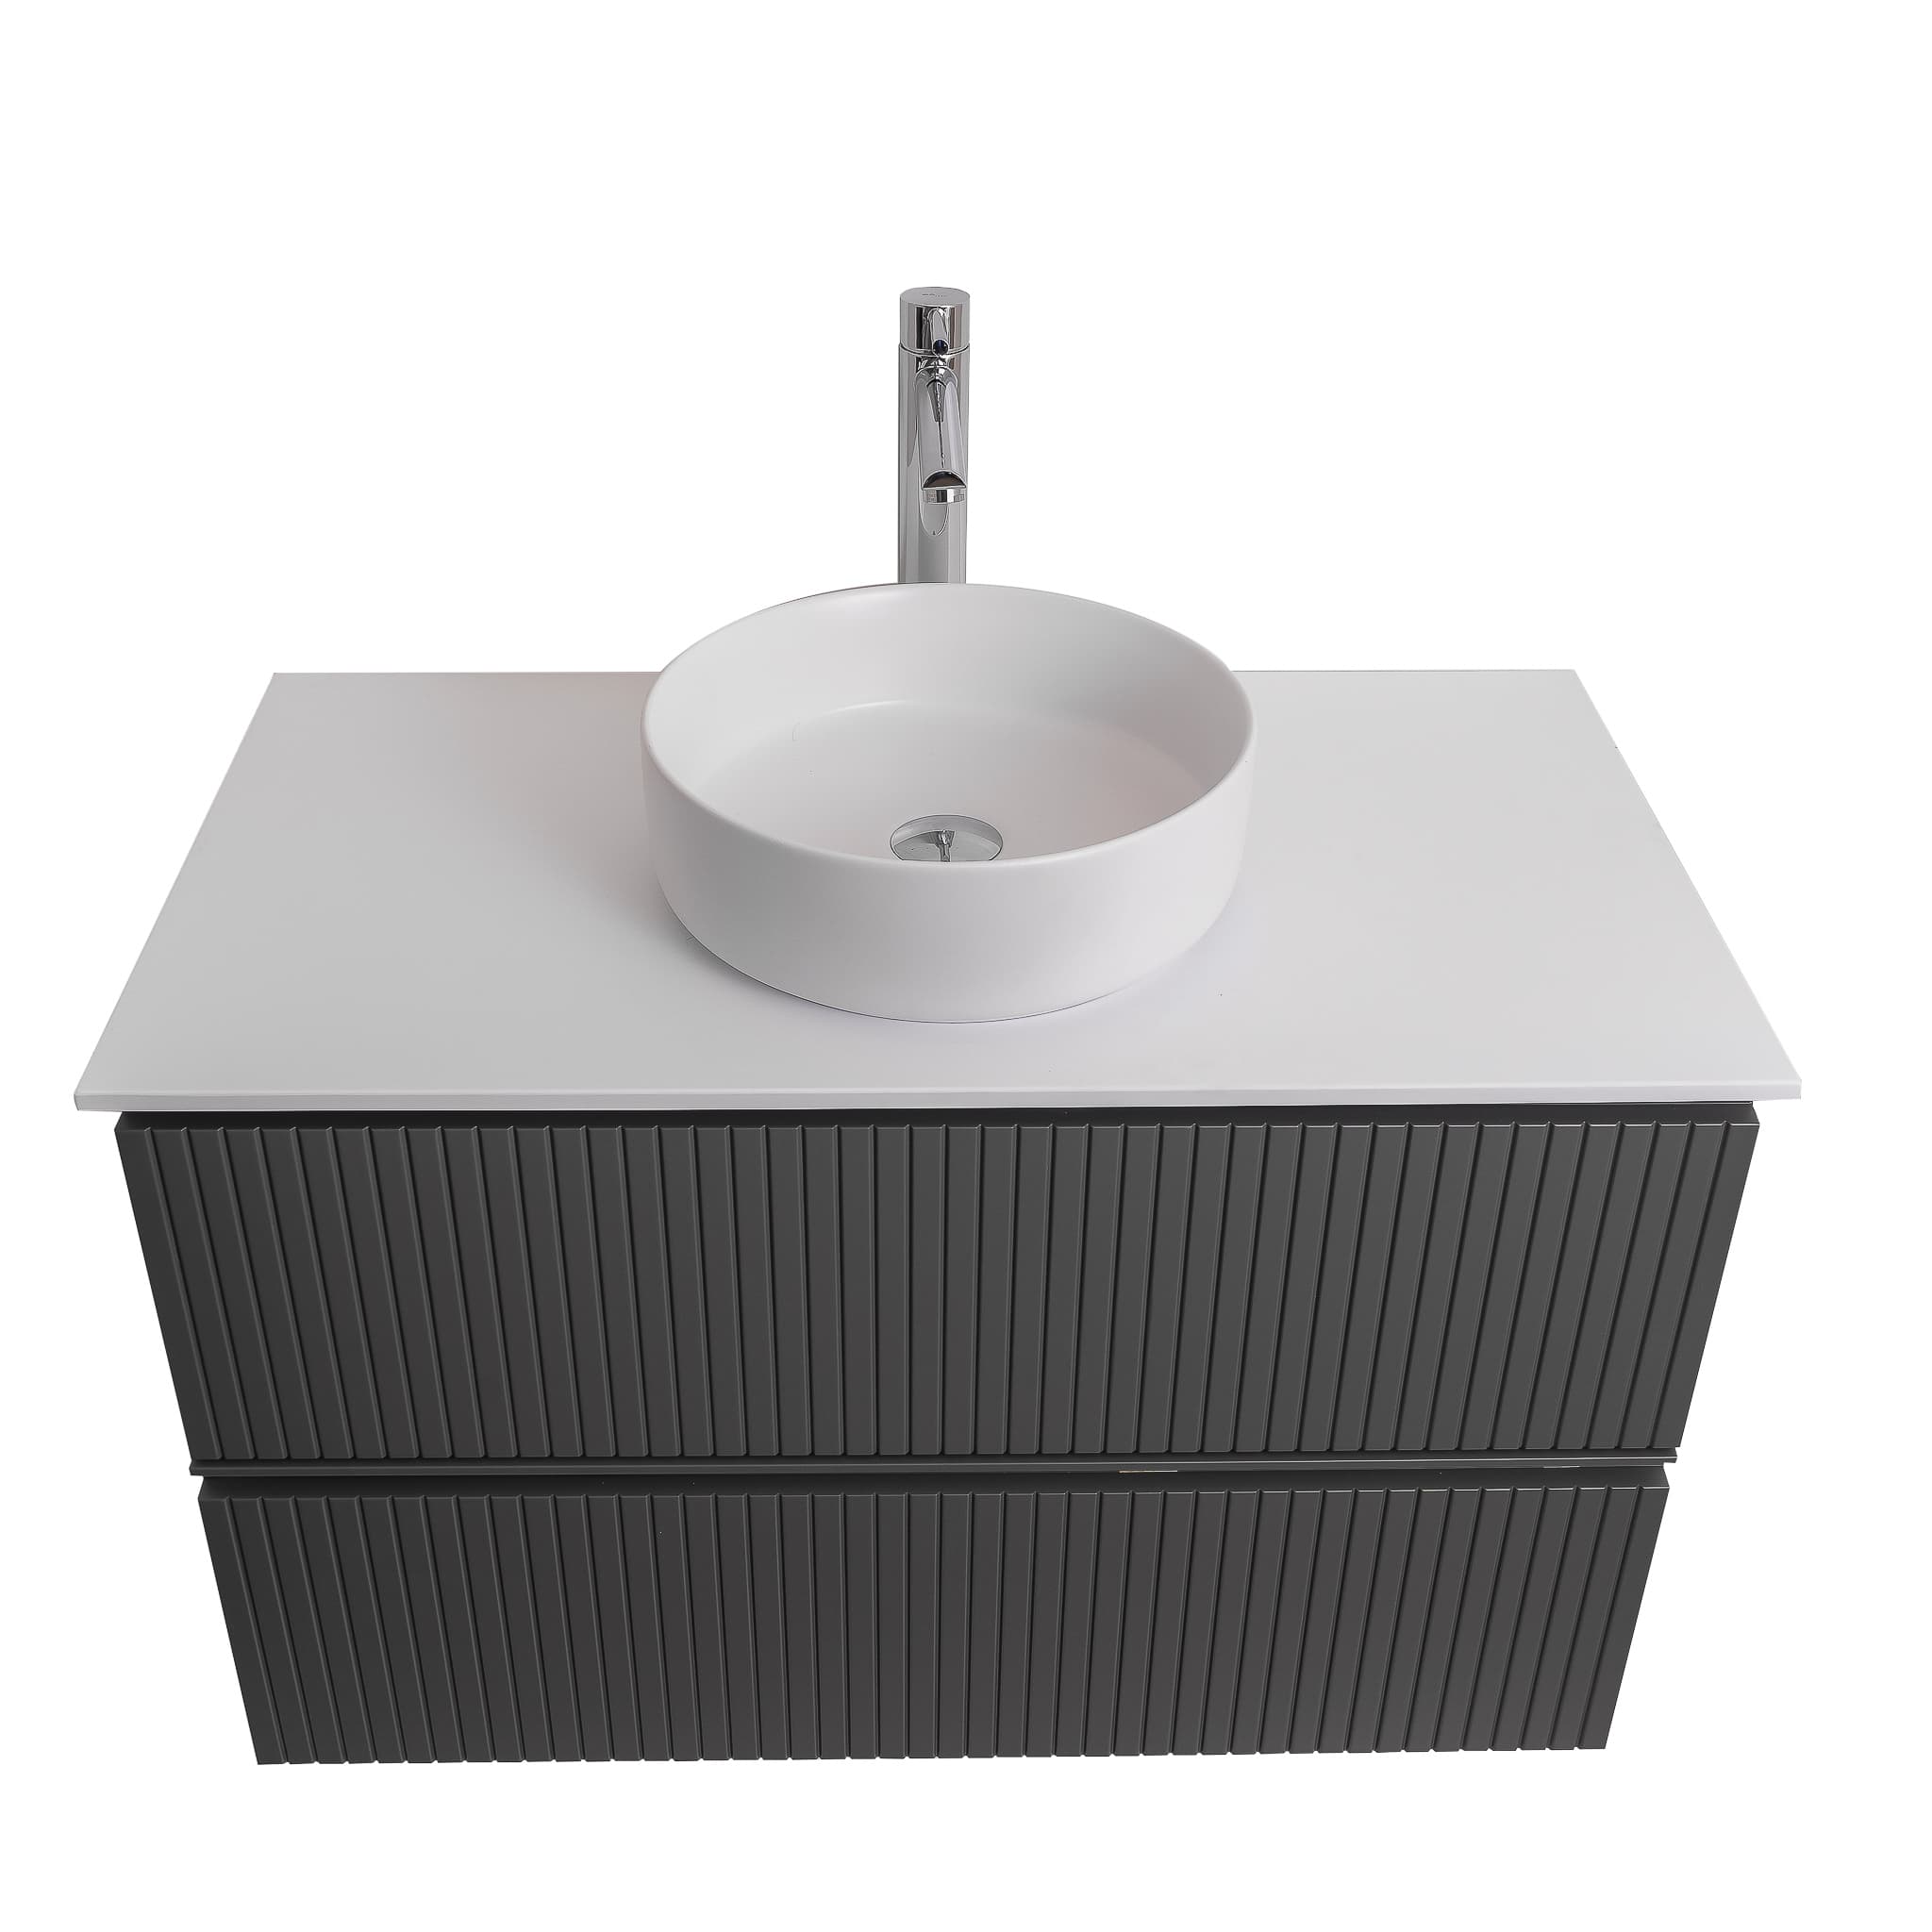 Ares 31.5 Matte Grey Cabinet, Ares White Top And Ares White Ceramic Basin, Wall Mounted Modern Vanity Set